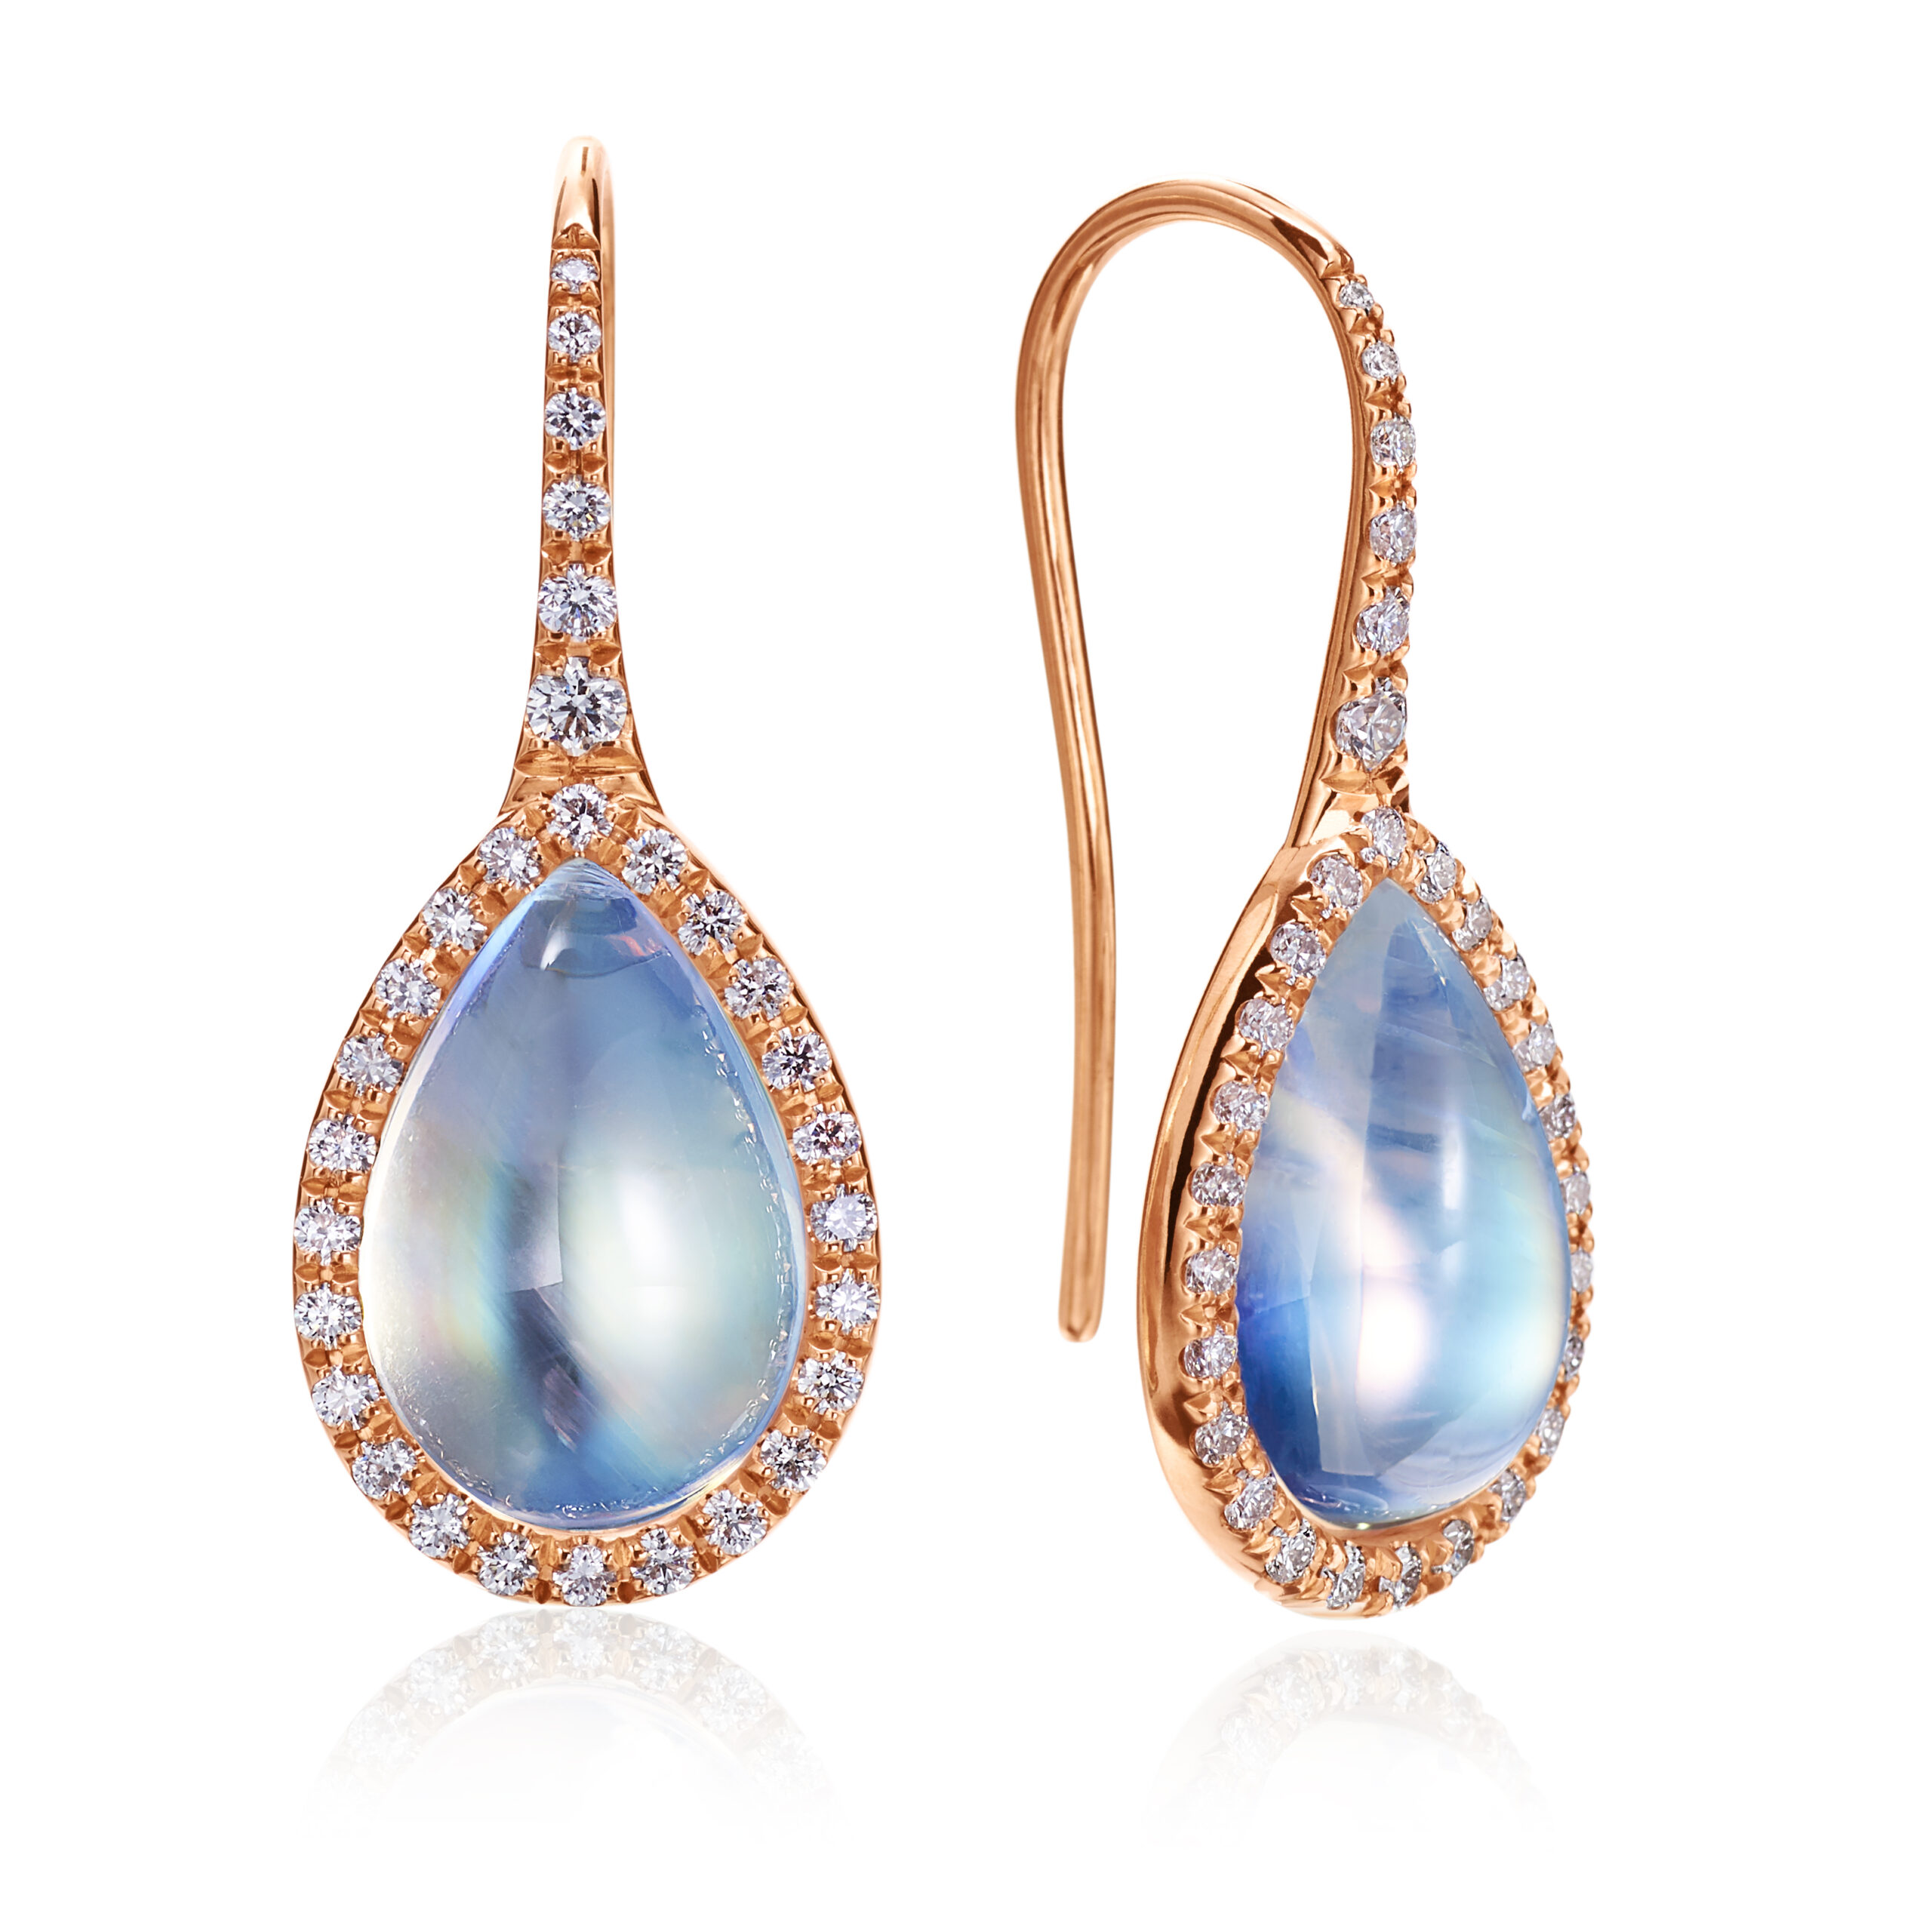 Rose Gold and Moonstone Earrings